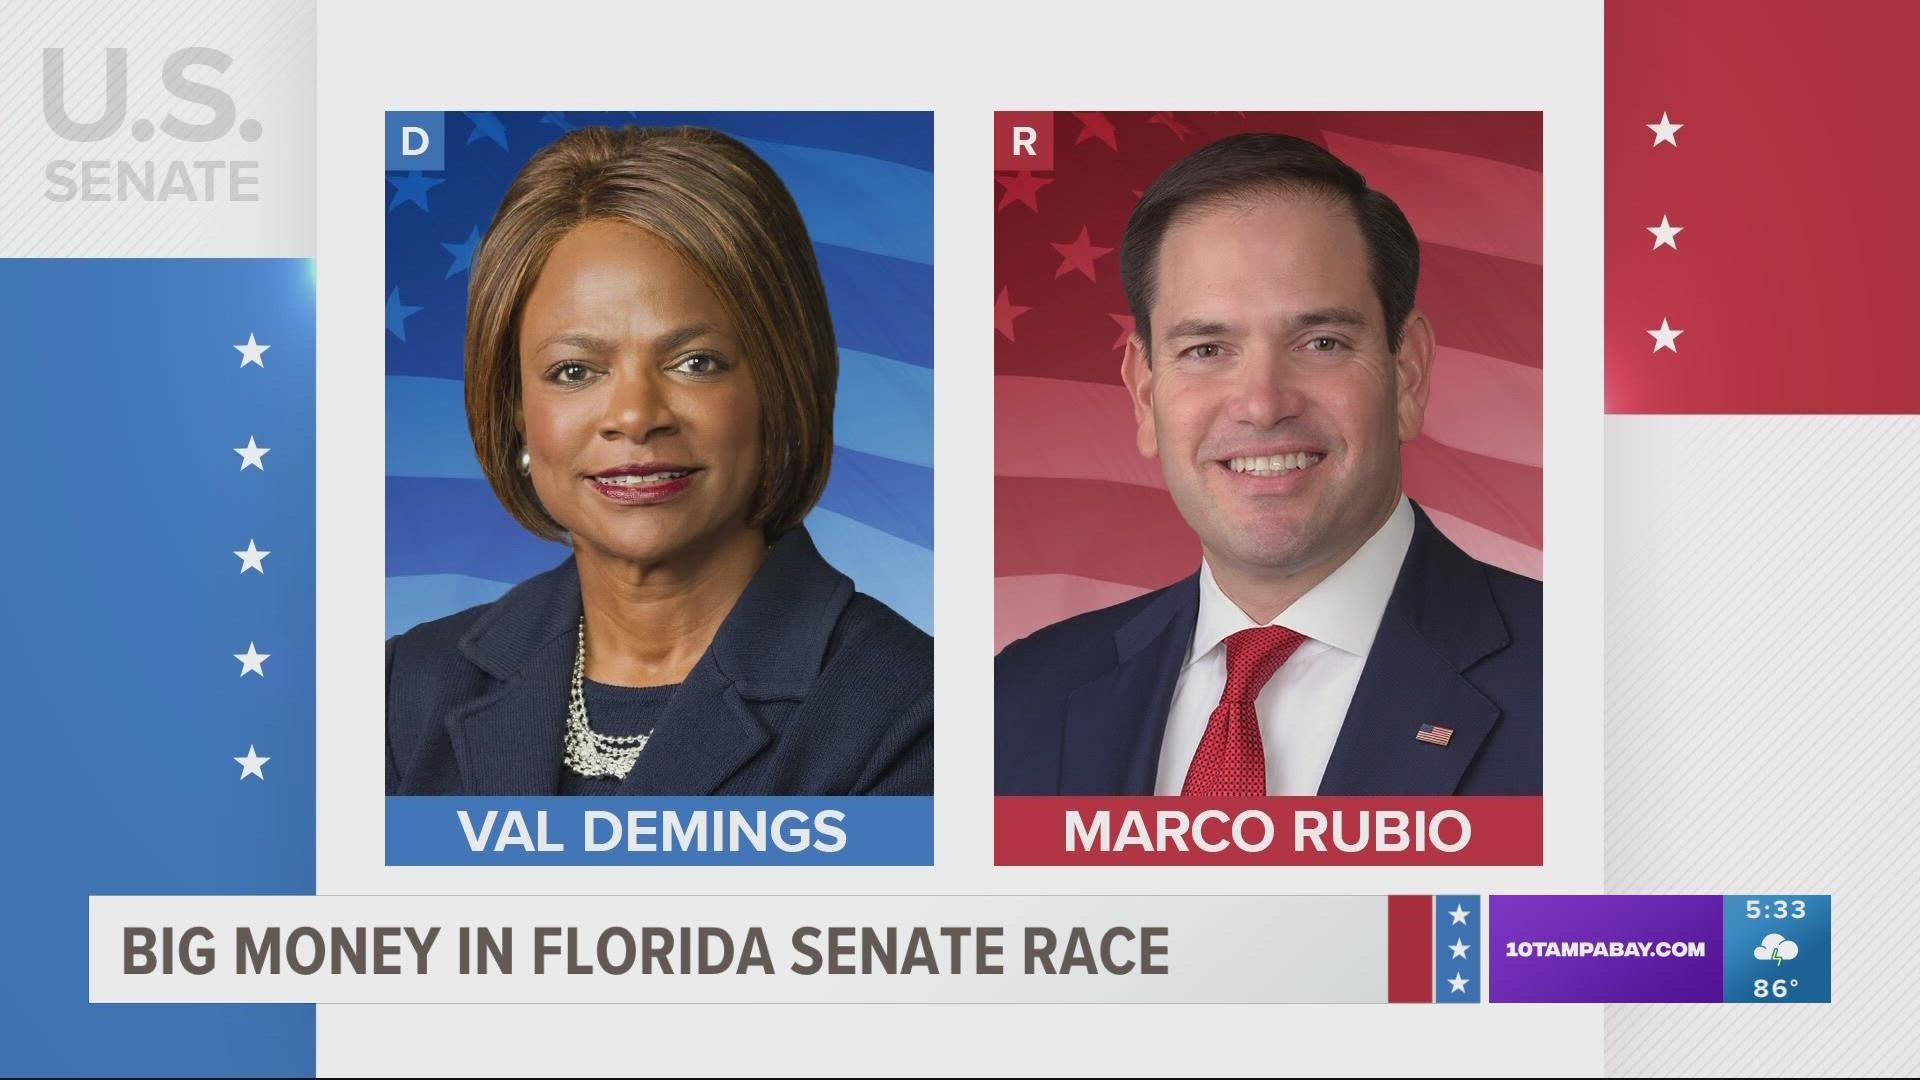 The race is already the third most-funded Senate race in the nation. Demings has an early fundraising advantage.